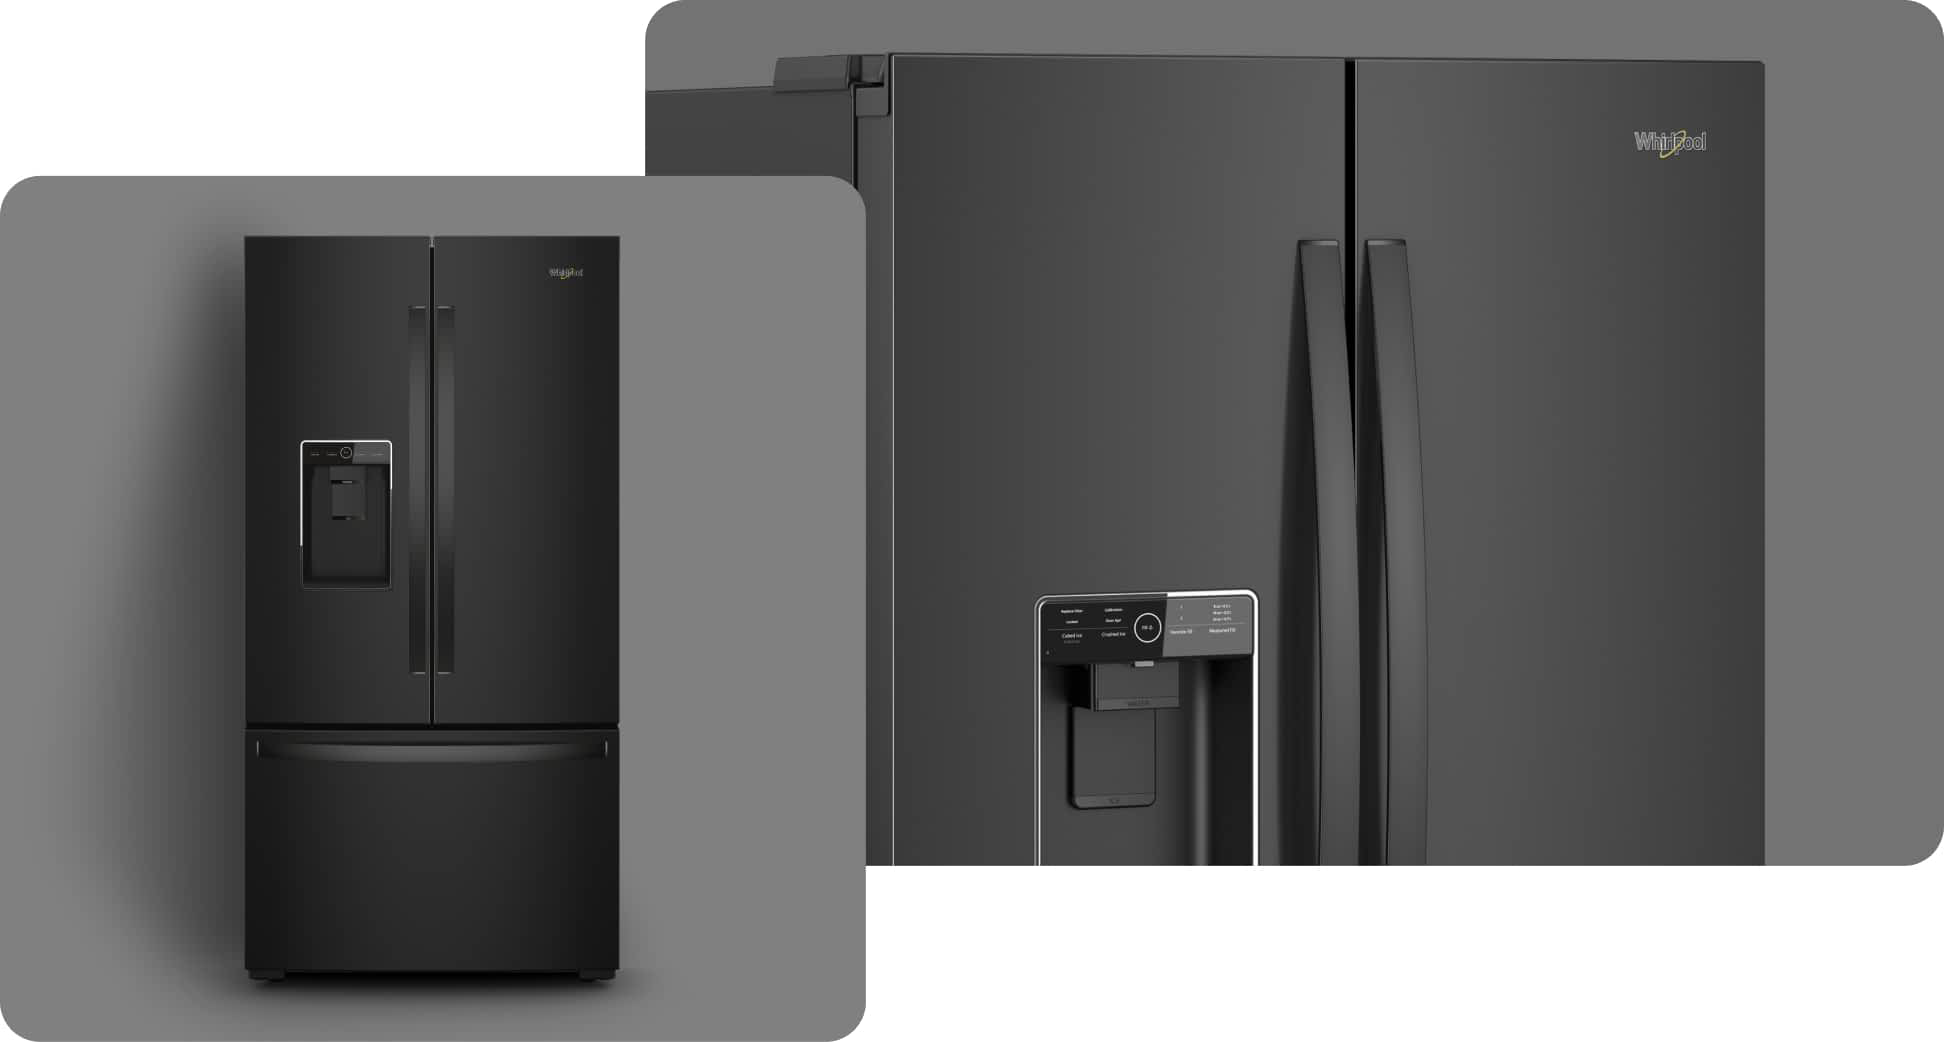 A Whirlpool® Refrigerator with a Black Finish